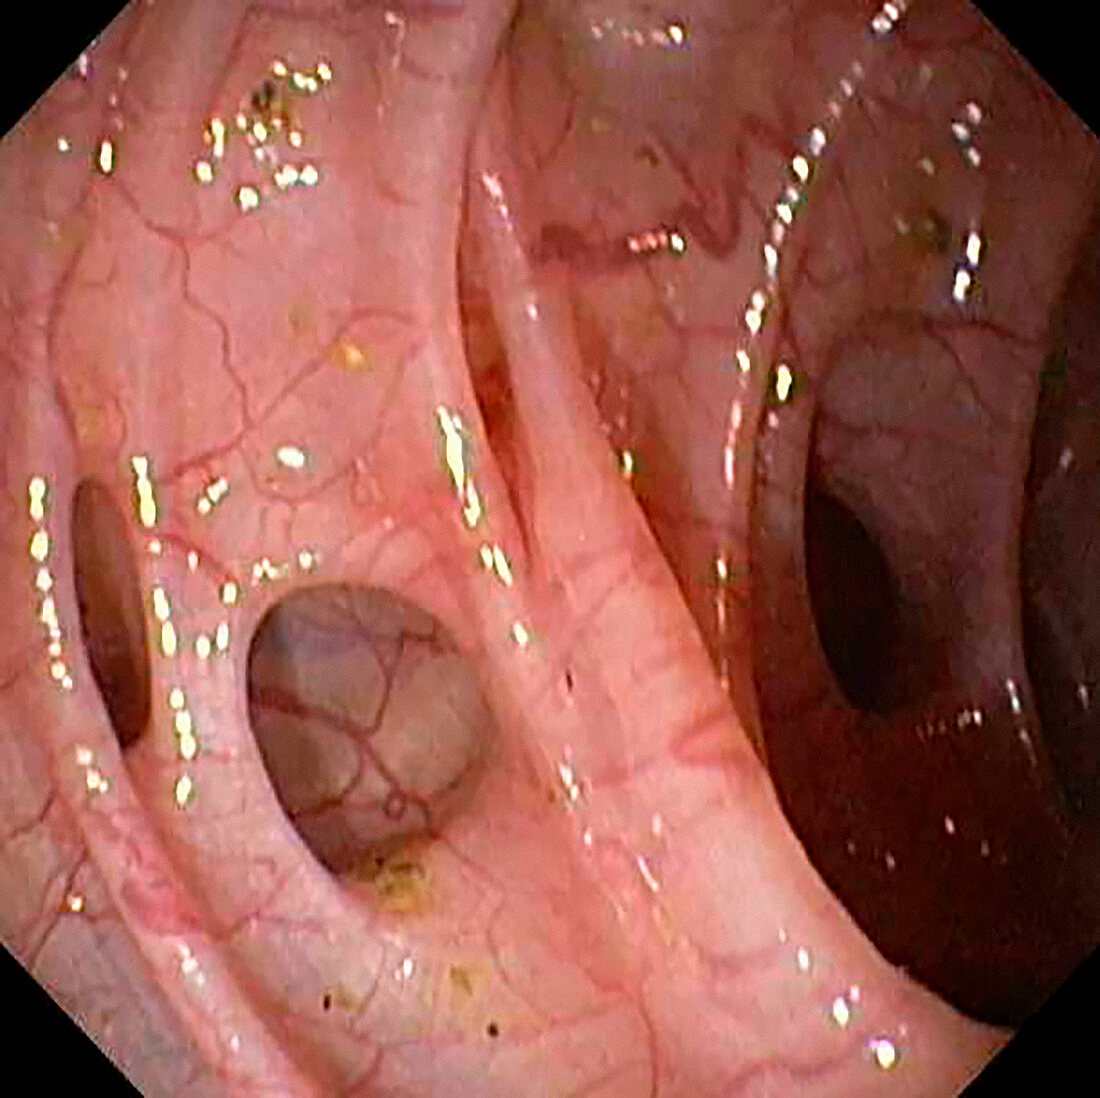 Diverticular disease in the colon